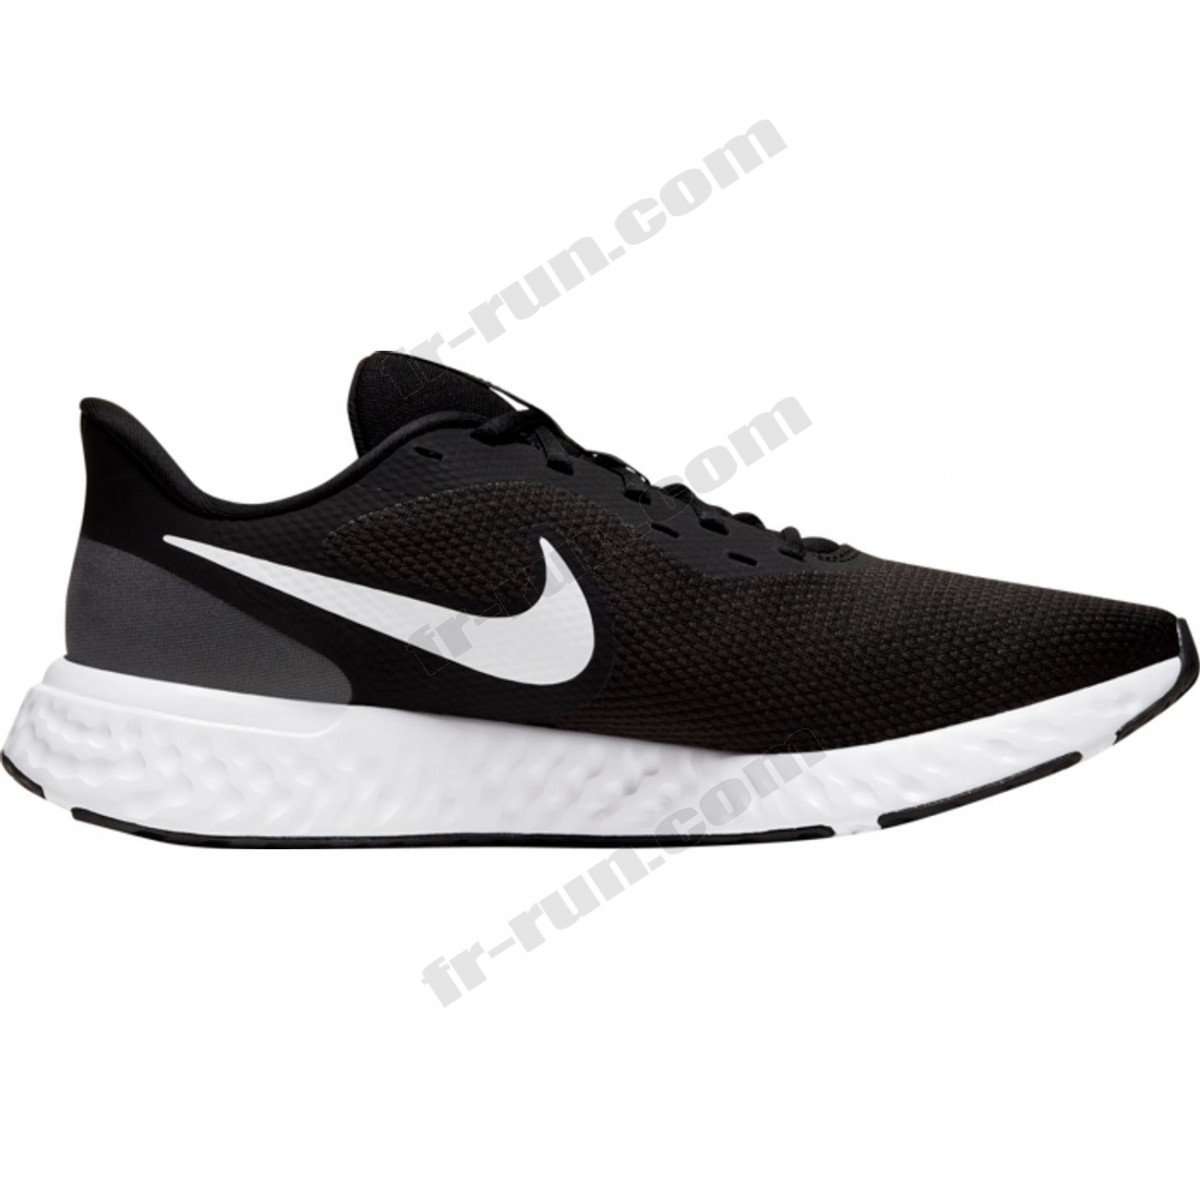 Nike/CHAUSSURES BASSES running homme NIKE NIKE REVOLUTION 5 √ Nouveau style √ Soldes - Nike/CHAUSSURES BASSES running homme NIKE NIKE REVOLUTION 5 √ Nouveau style √ Soldes